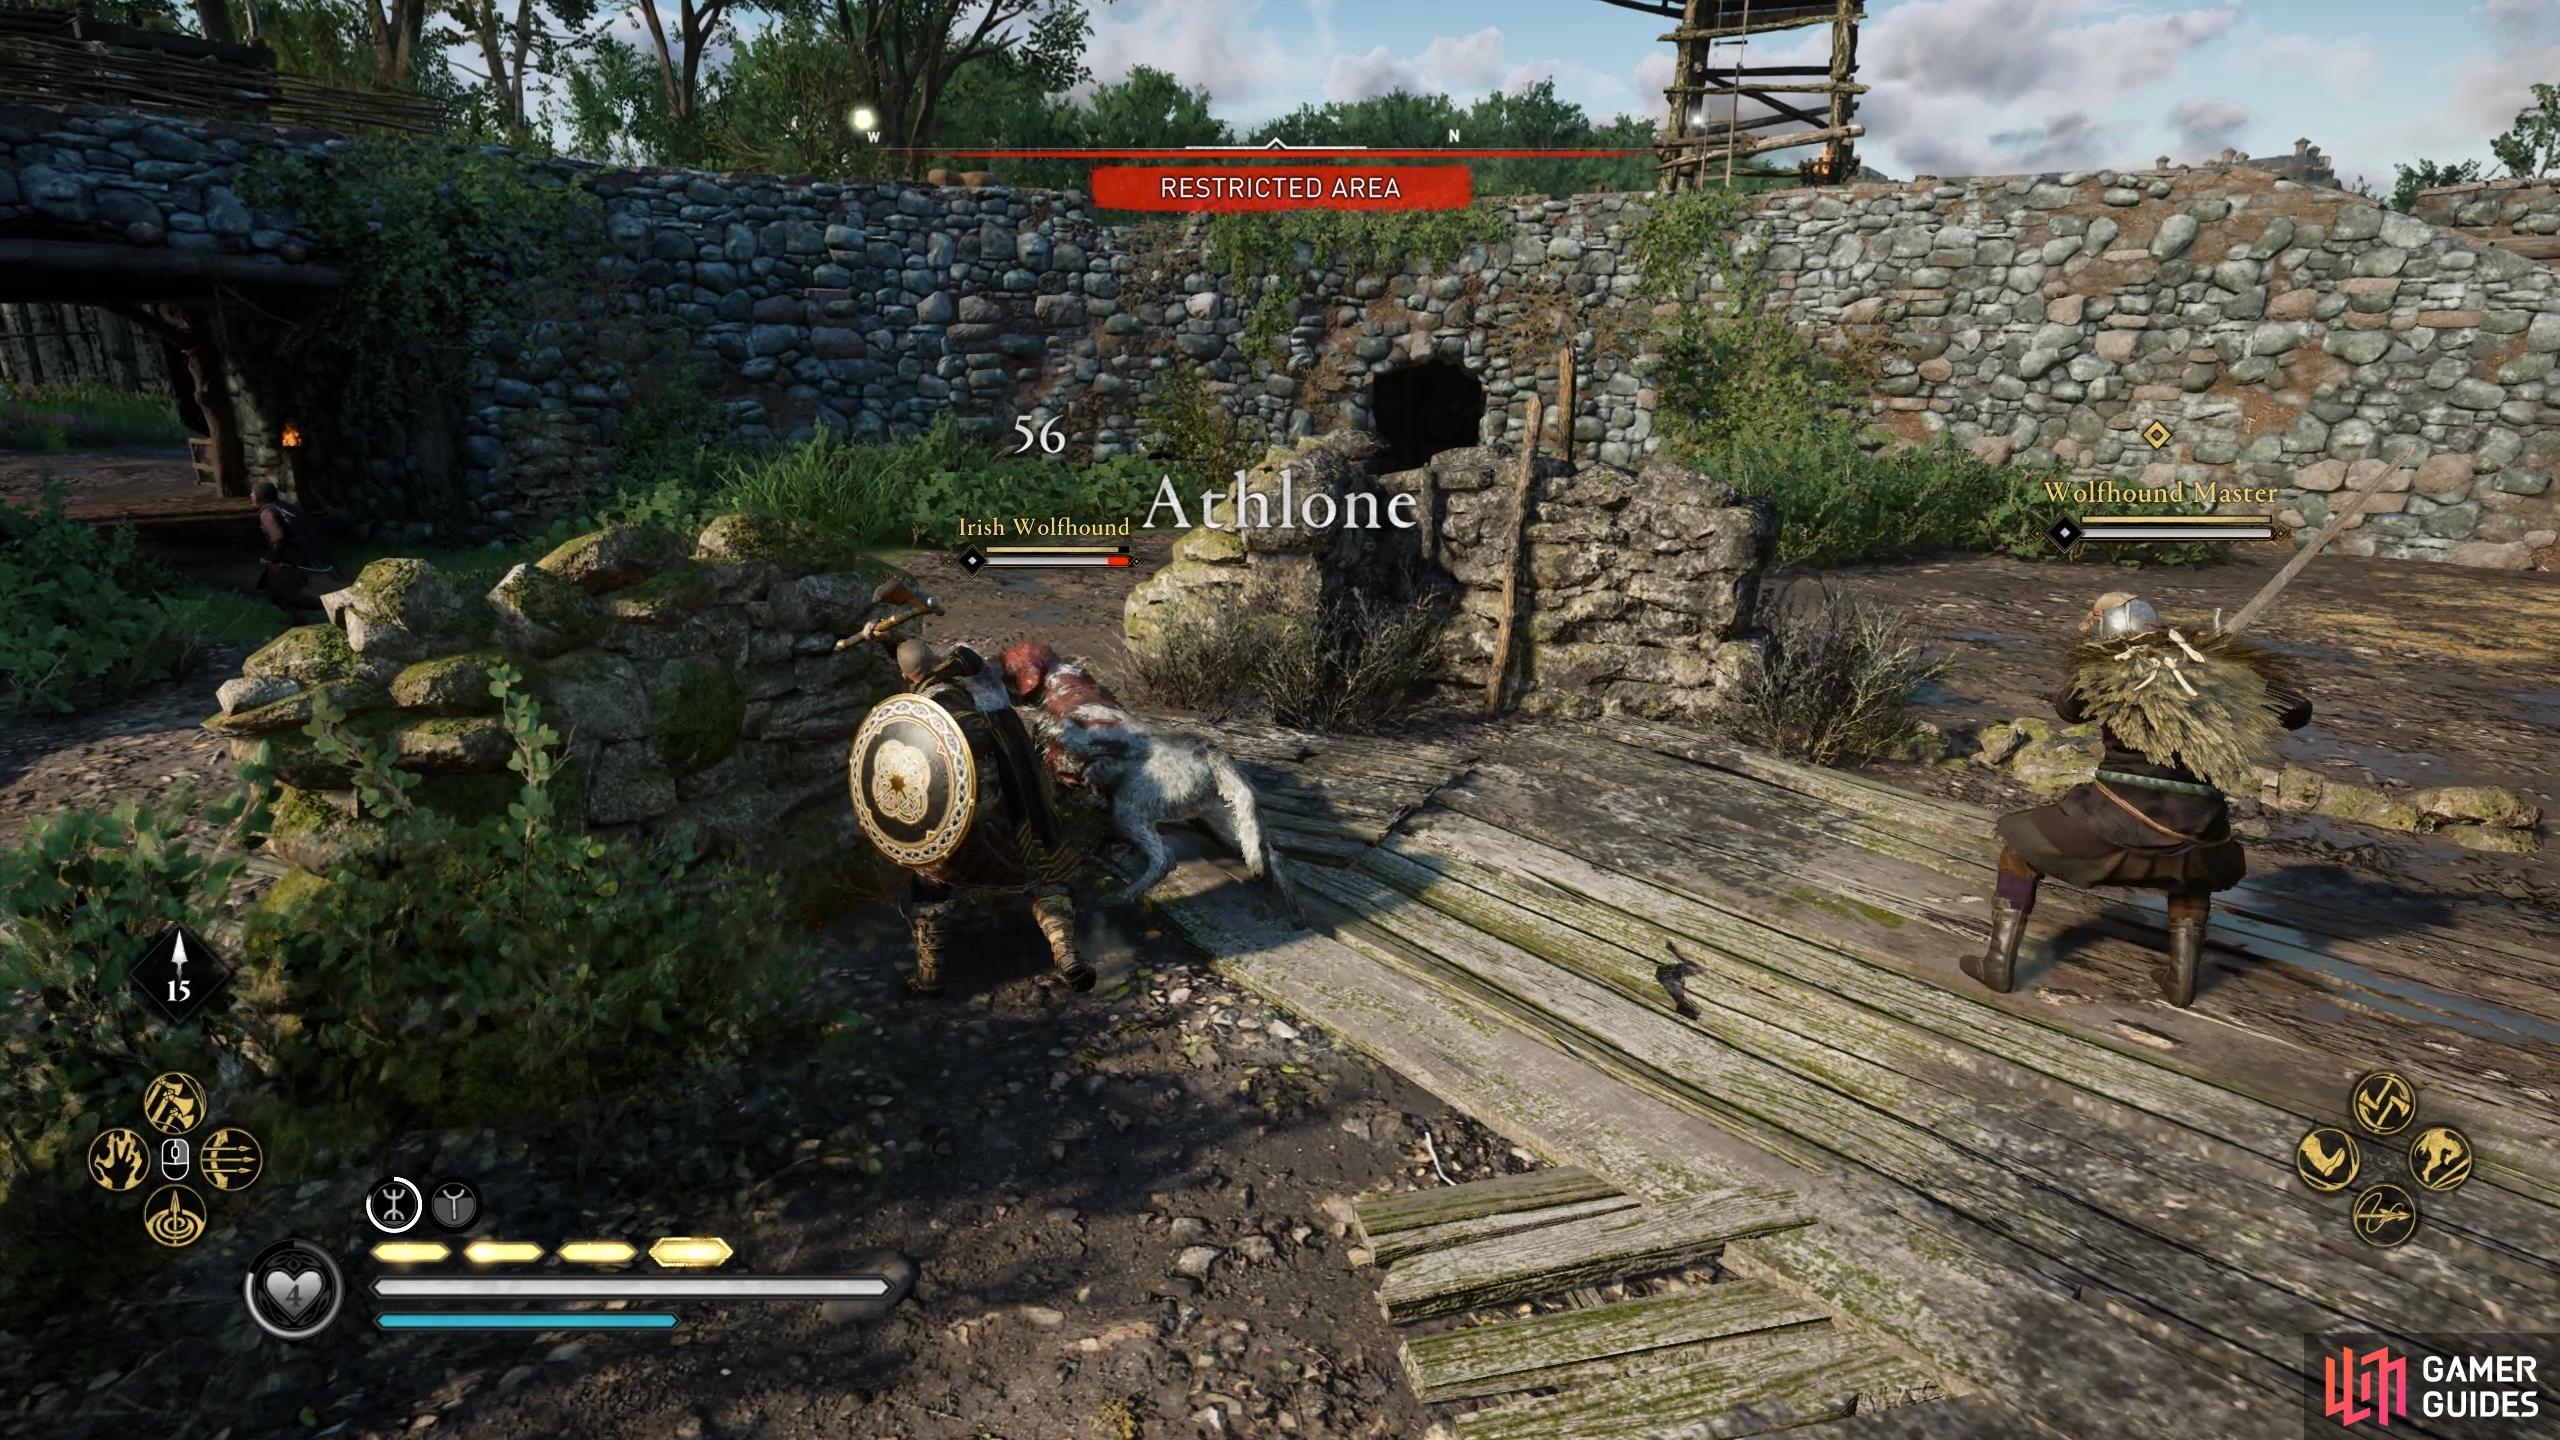 Youll need to clear Athlone of the enemies before you can investigate it, including a Wolfhound and its master.